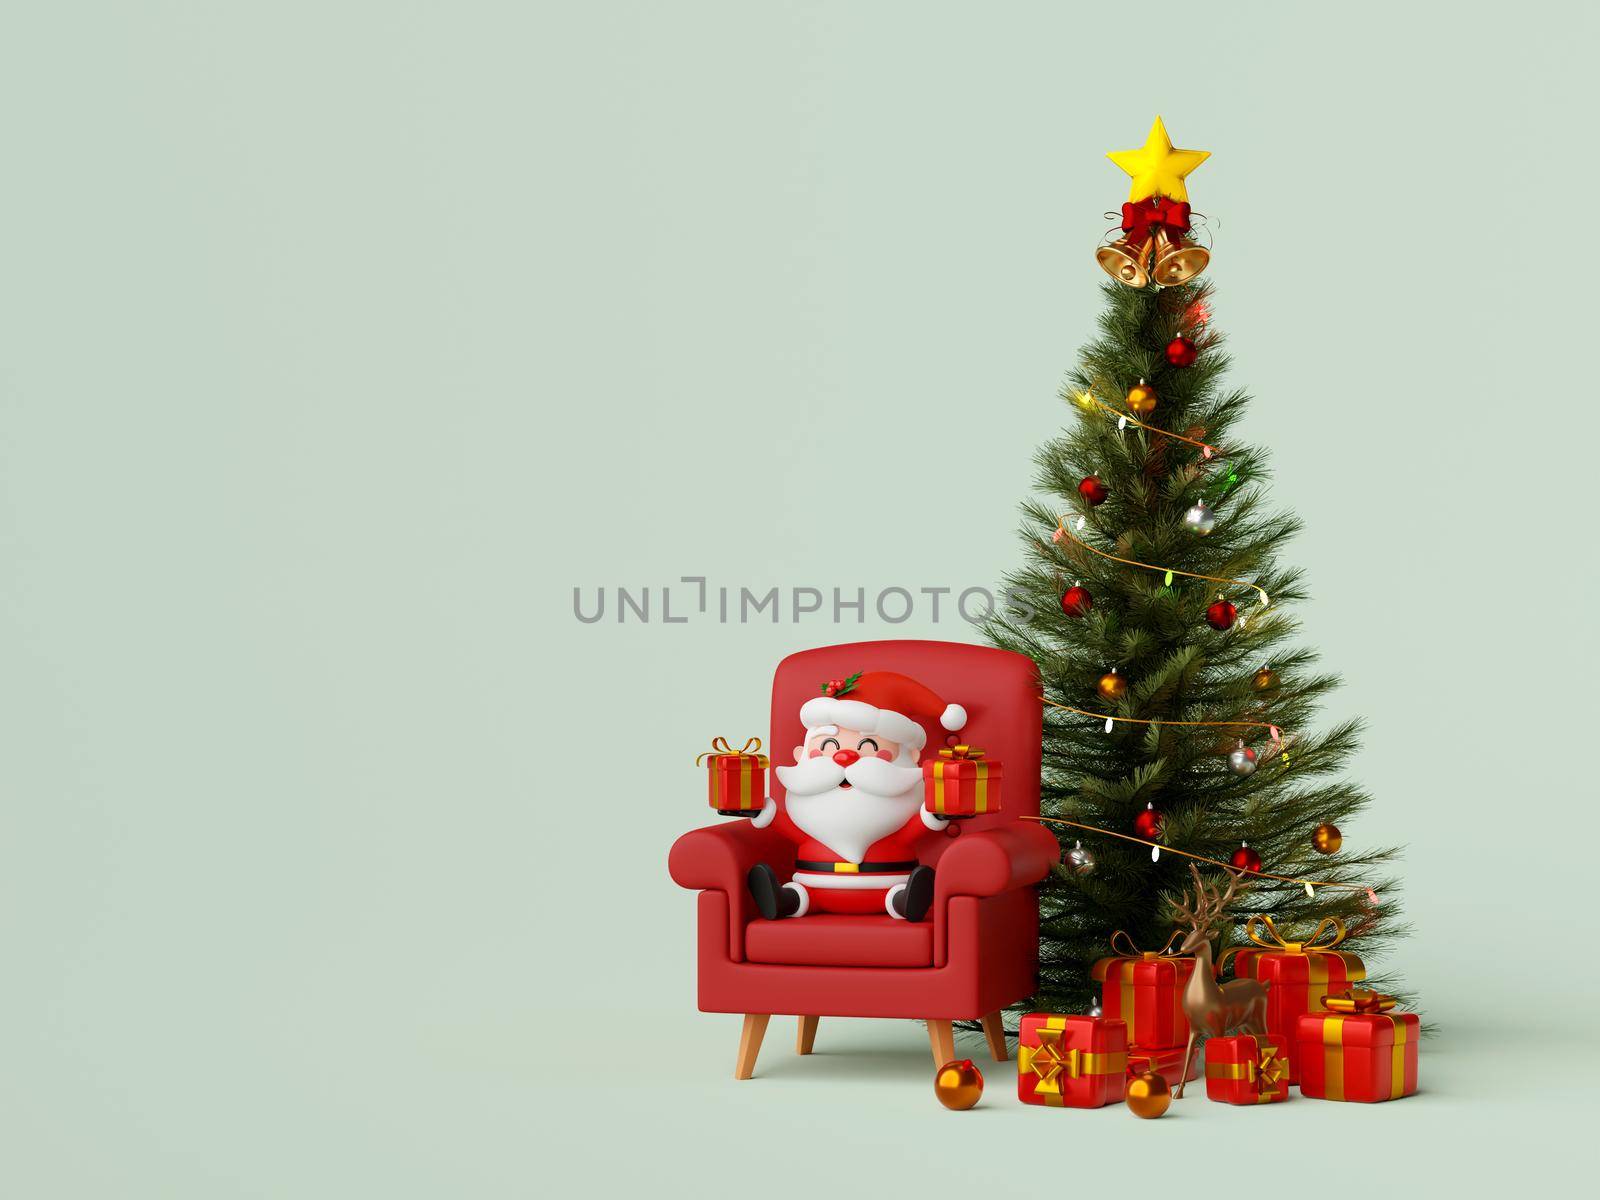 Christmas banner of Santa Claus with Christmas tree and gift, 3d illustration